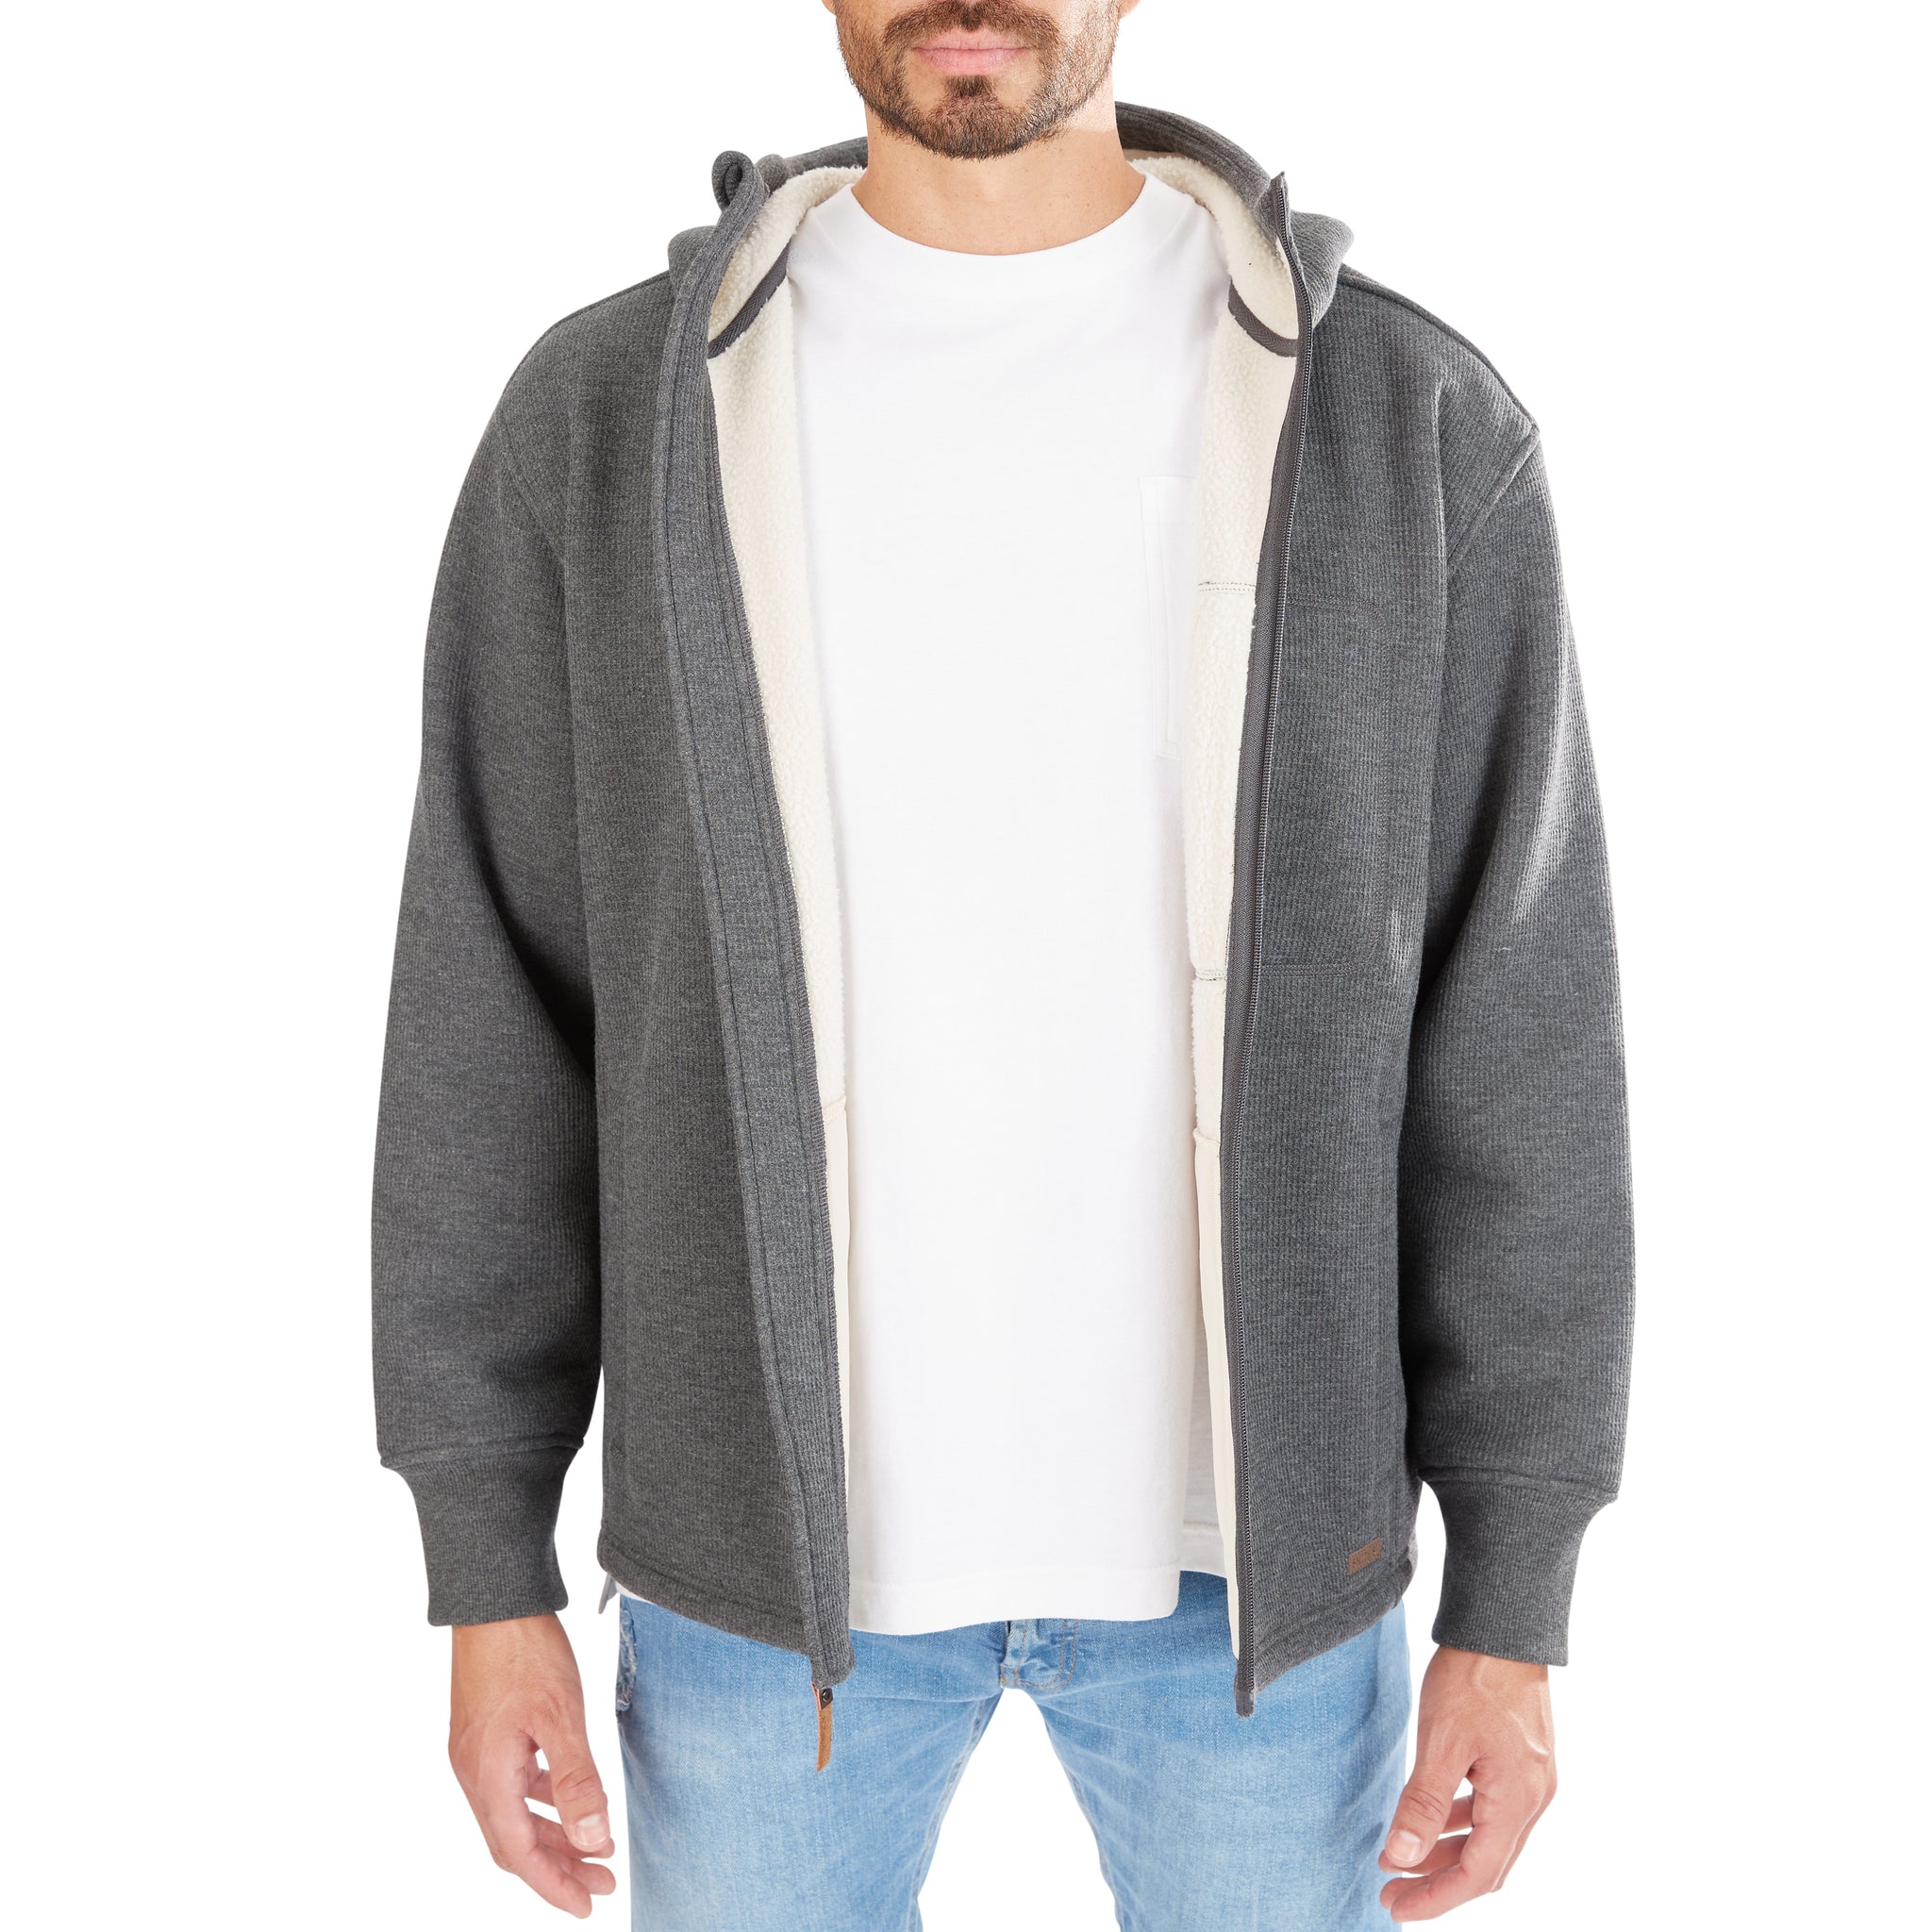 SHERPA-LINED HEATHERED THERMAL HOODED FULL-ZIP SHIRT-JACKET